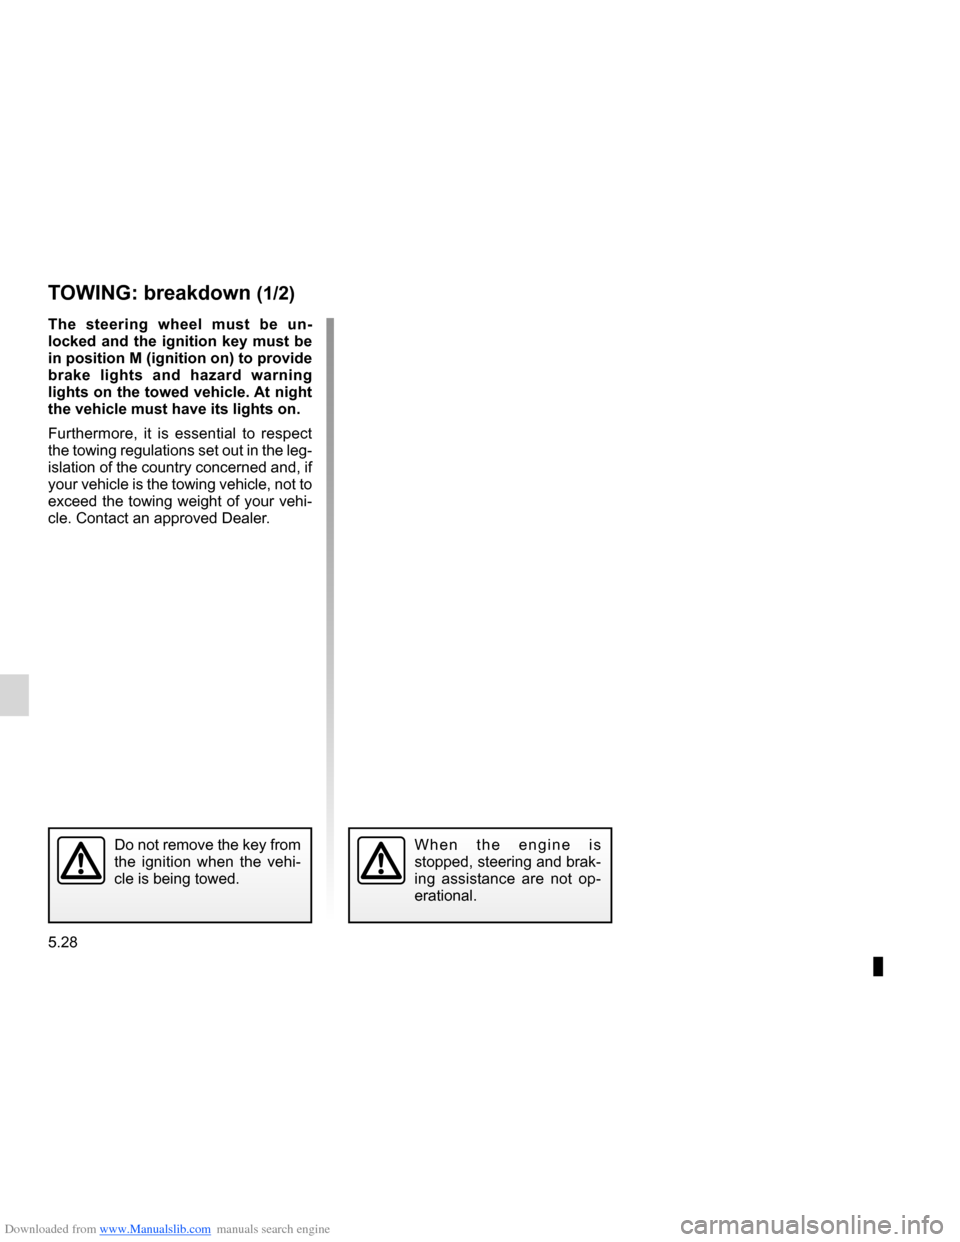 DACIA LODGY 2012 1.G Owners Manual Downloaded from www.Manualslib.com manuals search engine towing hitch........................................... (up to the end of the DU)
towing breakdown  ...................................... (up 